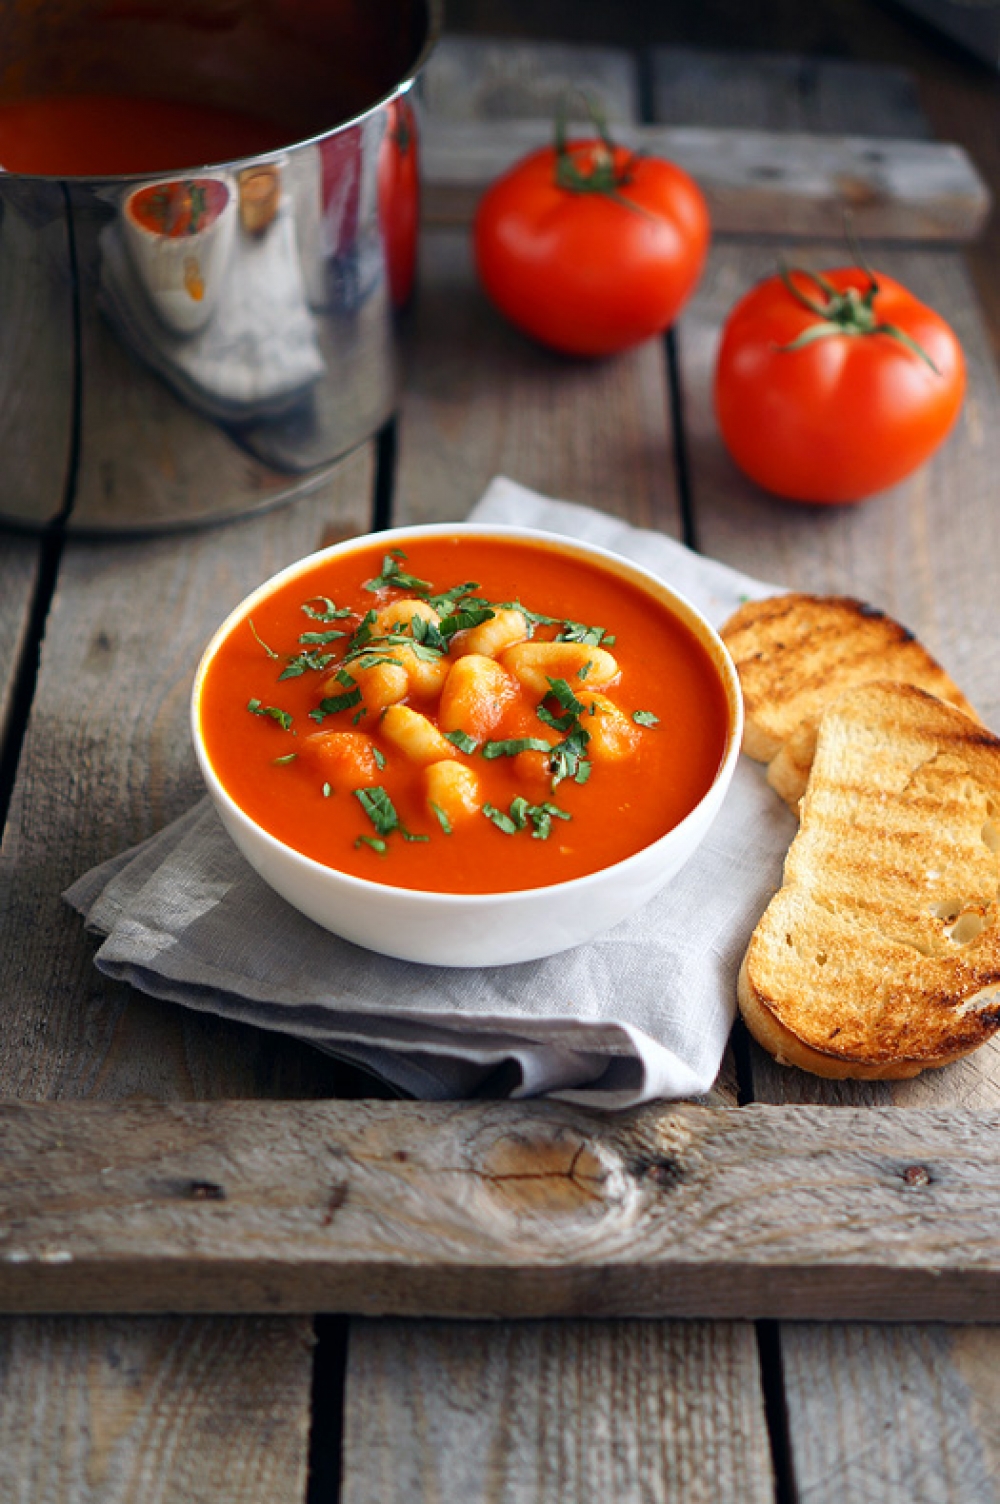 Homemade Tomato Soup with Gnocchi